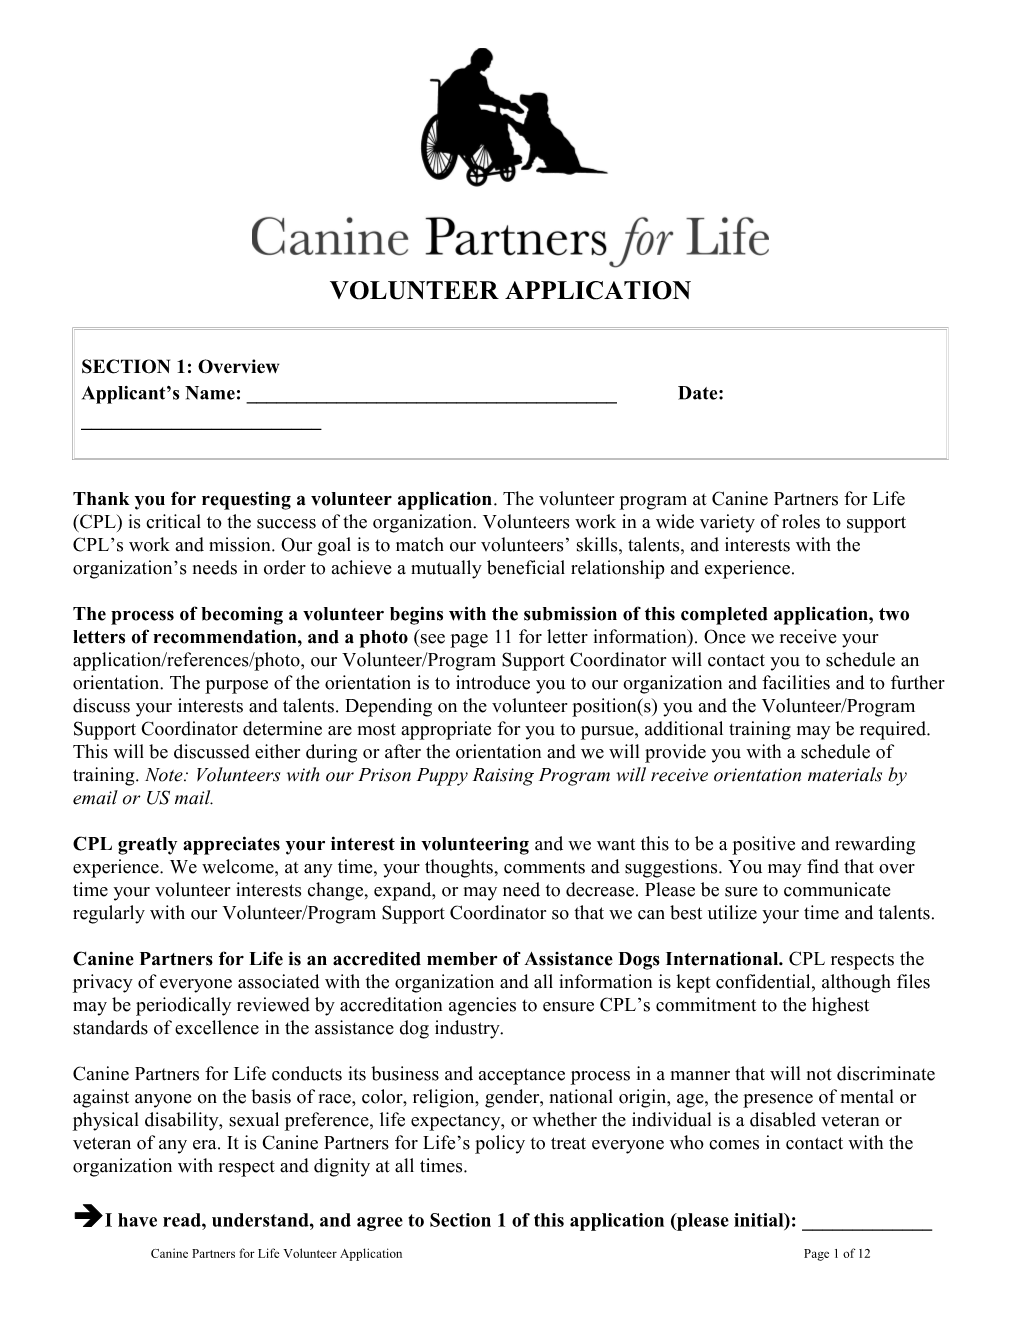 Canine Partners for Life - Volunteer Application